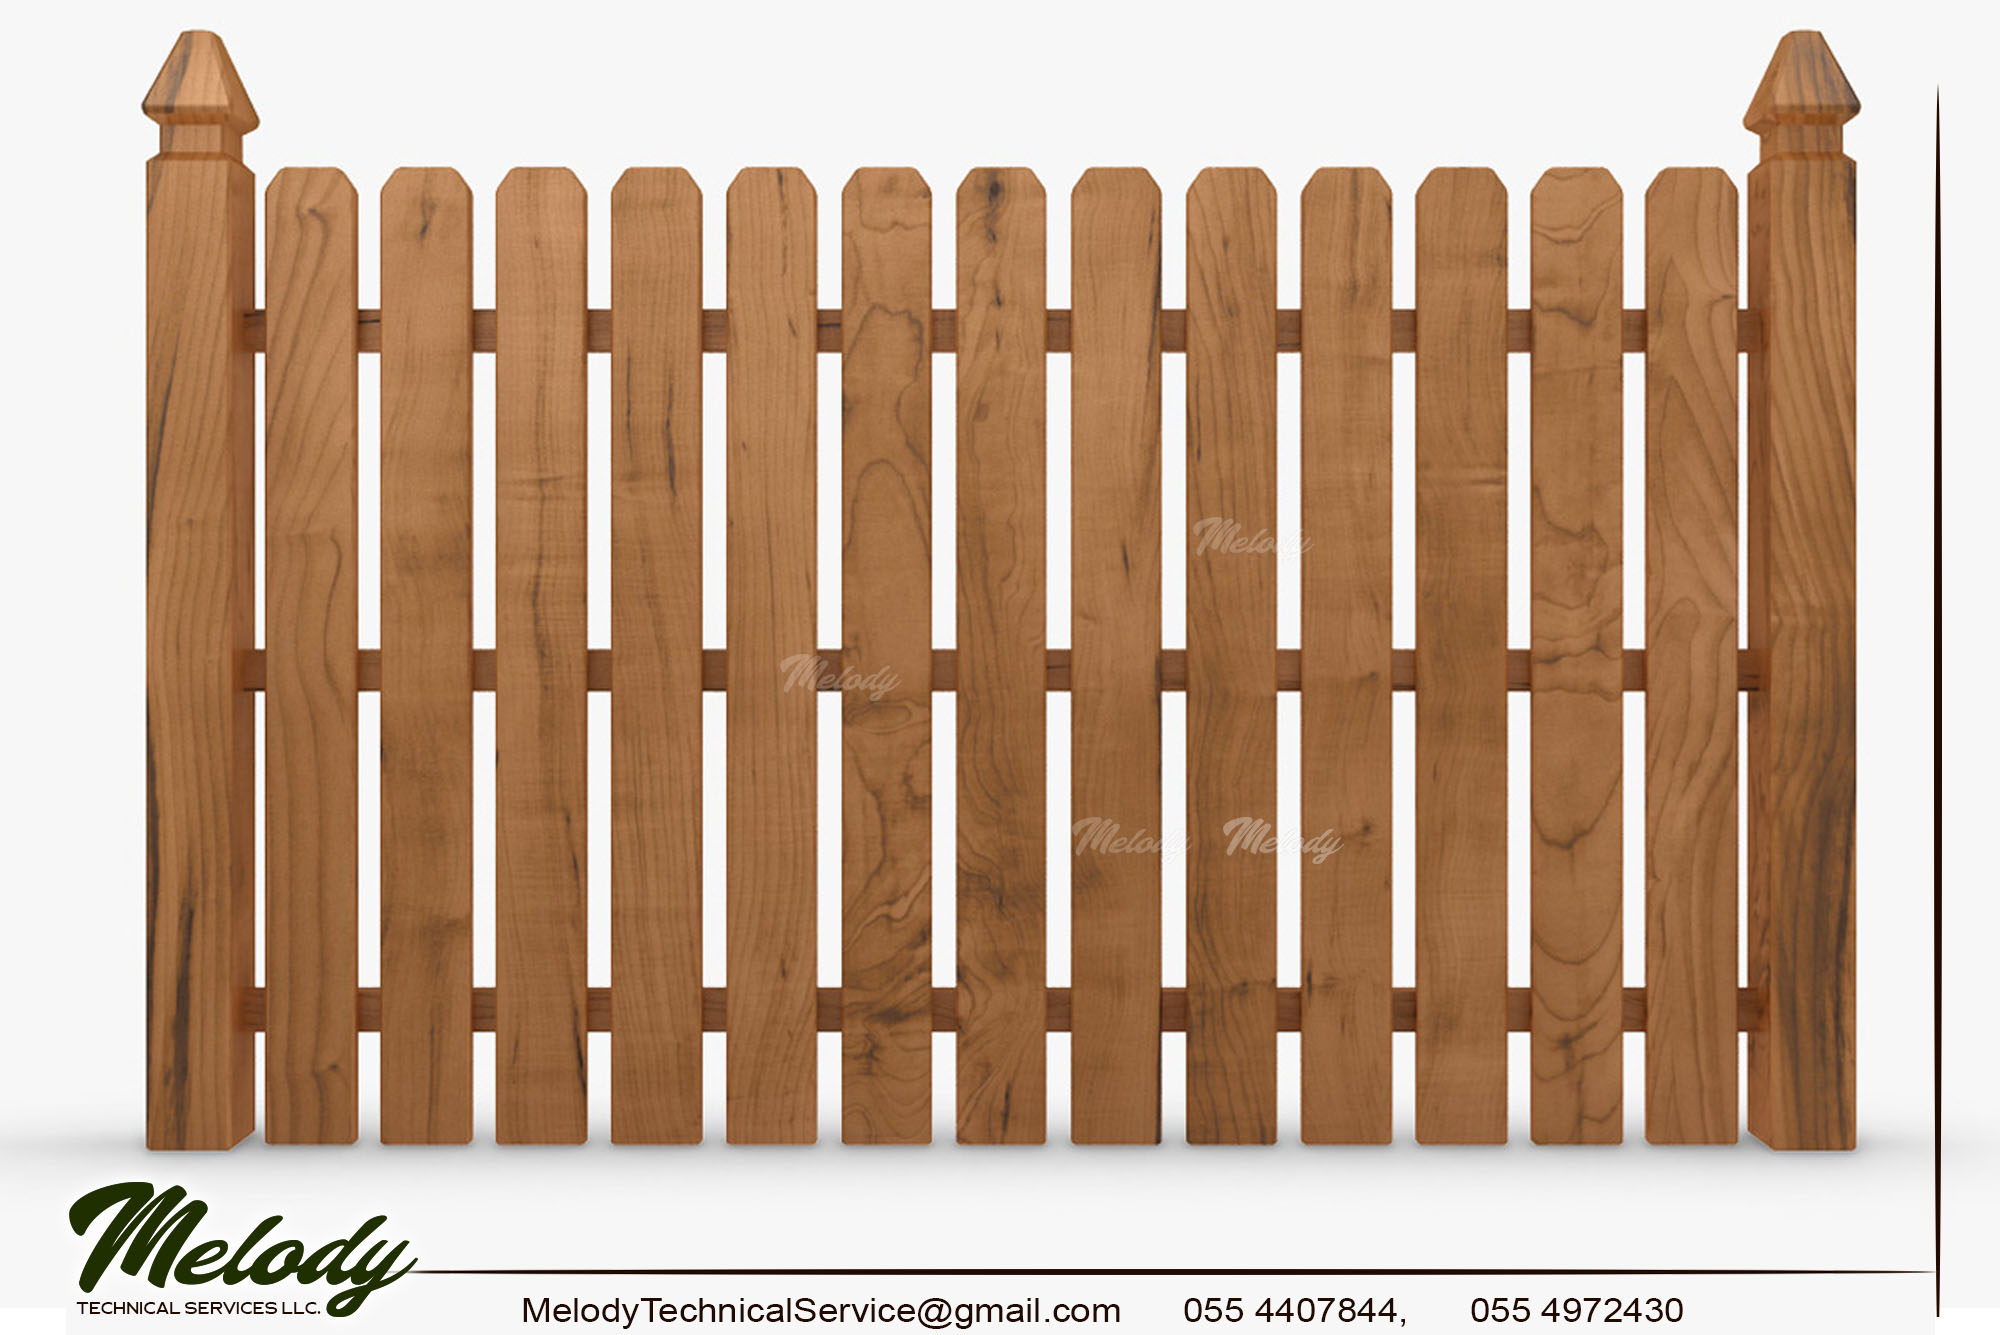 Wooden Fence For Home And Garden Privacy in Dubai (4).jpg